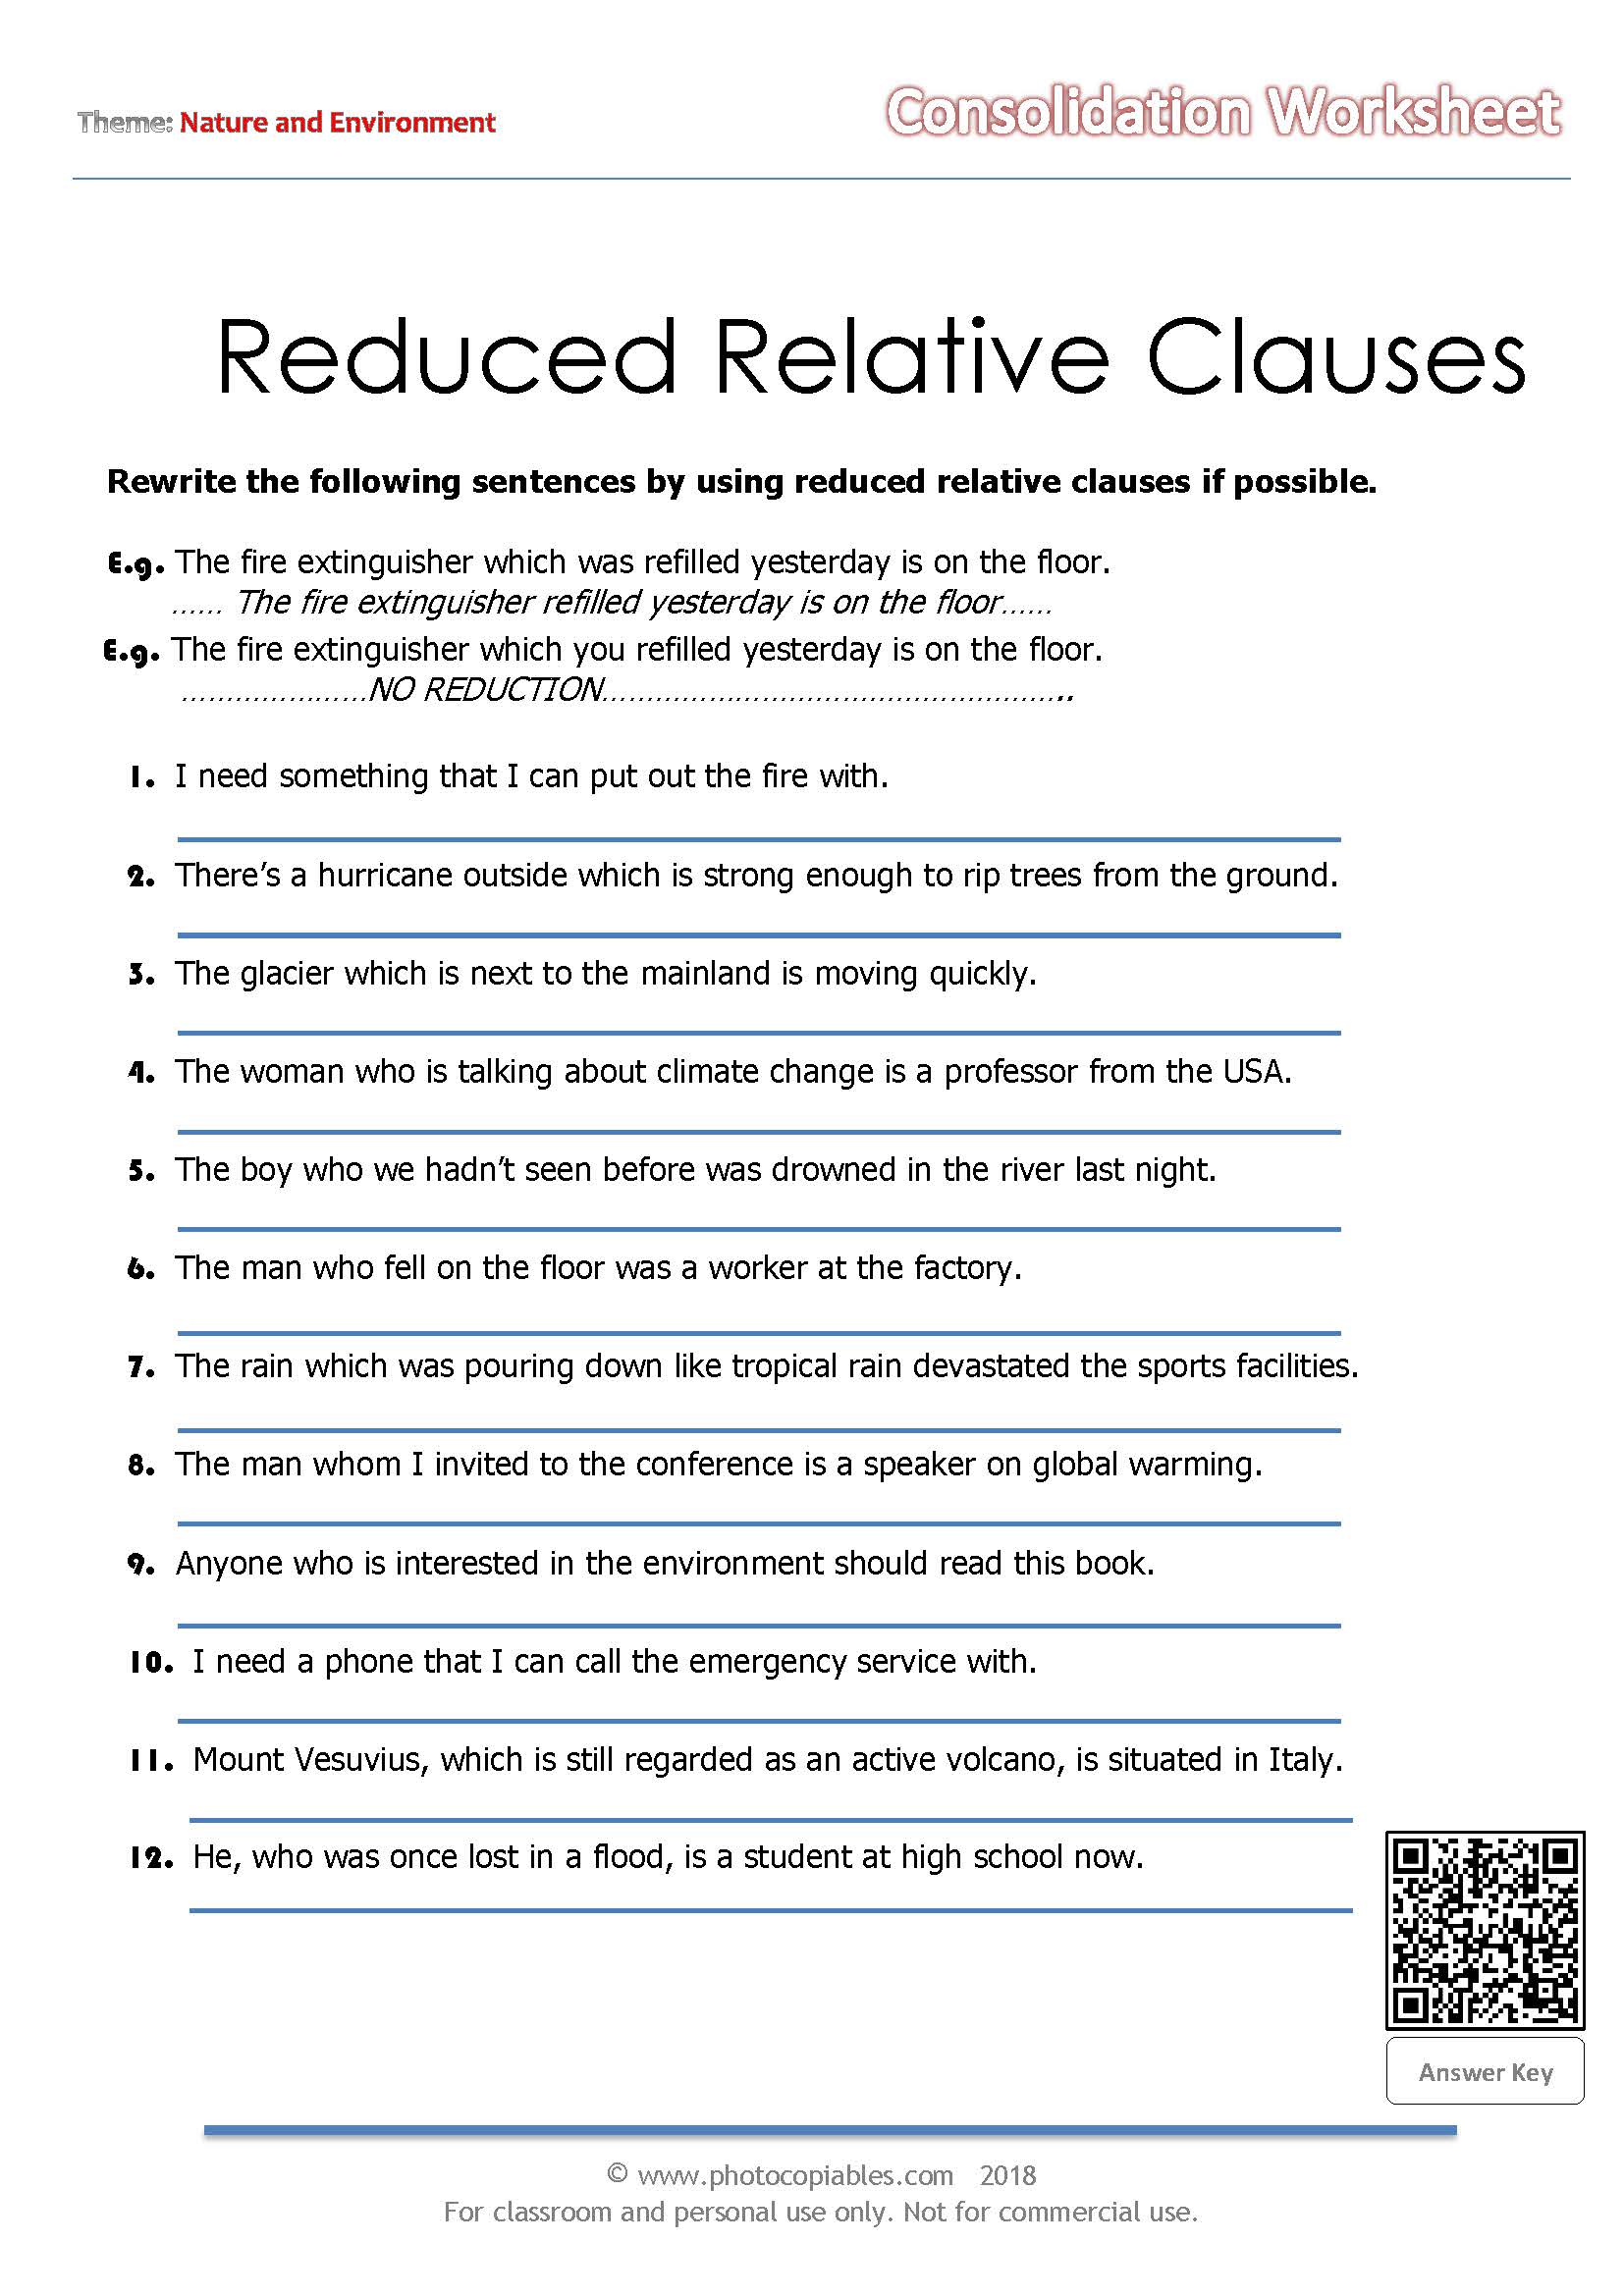 Reduced Relative Clauses Worksheet Photocopiables